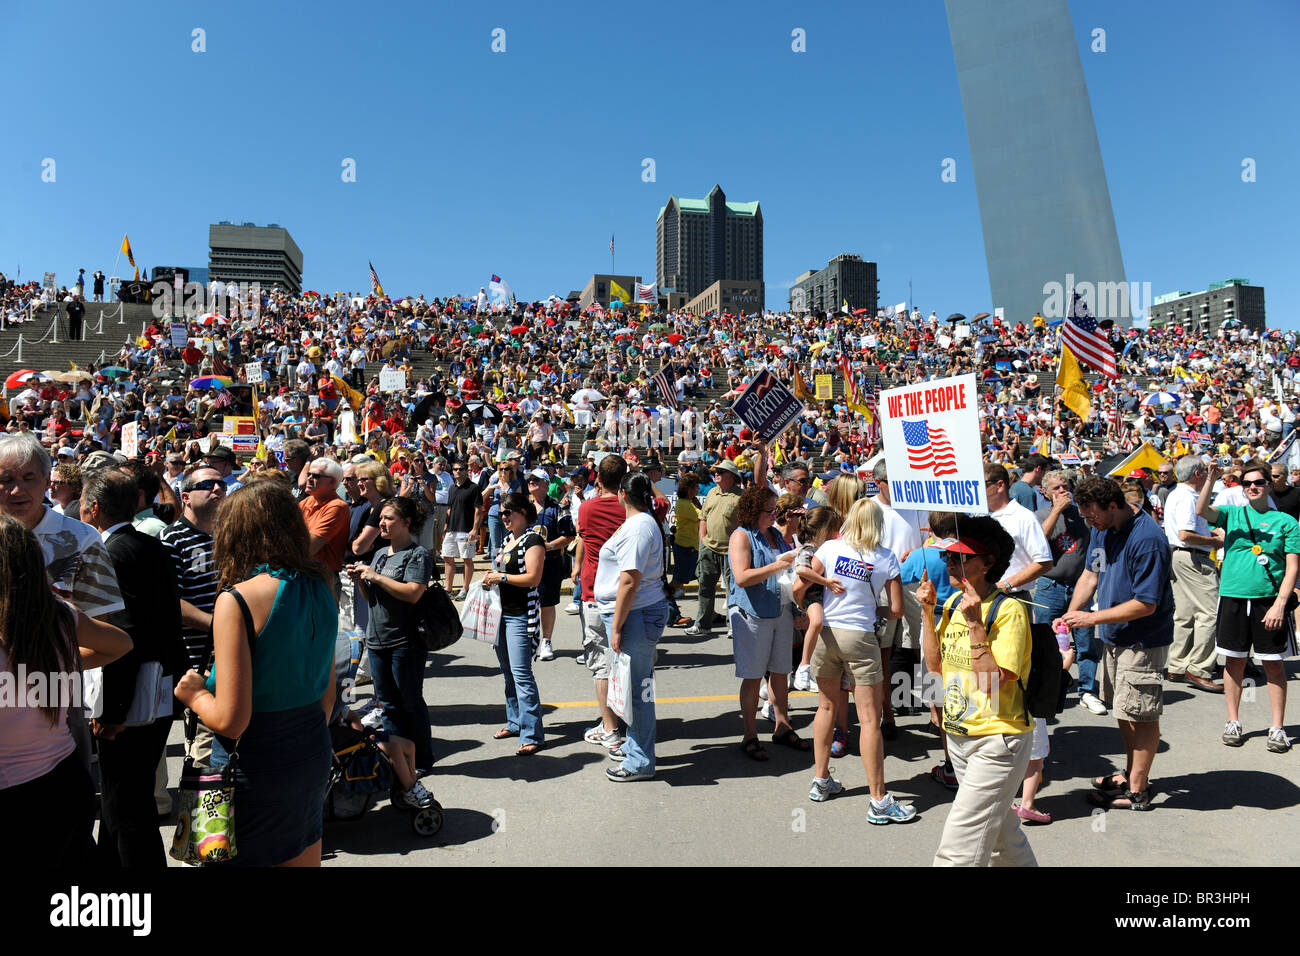 SAINT LOUIS, MISSOURI - SEPTEMBER 12: Rally of the Tea Party in Downtown Saint Louis under the Arch, on September 12, 2010 Stock Photo